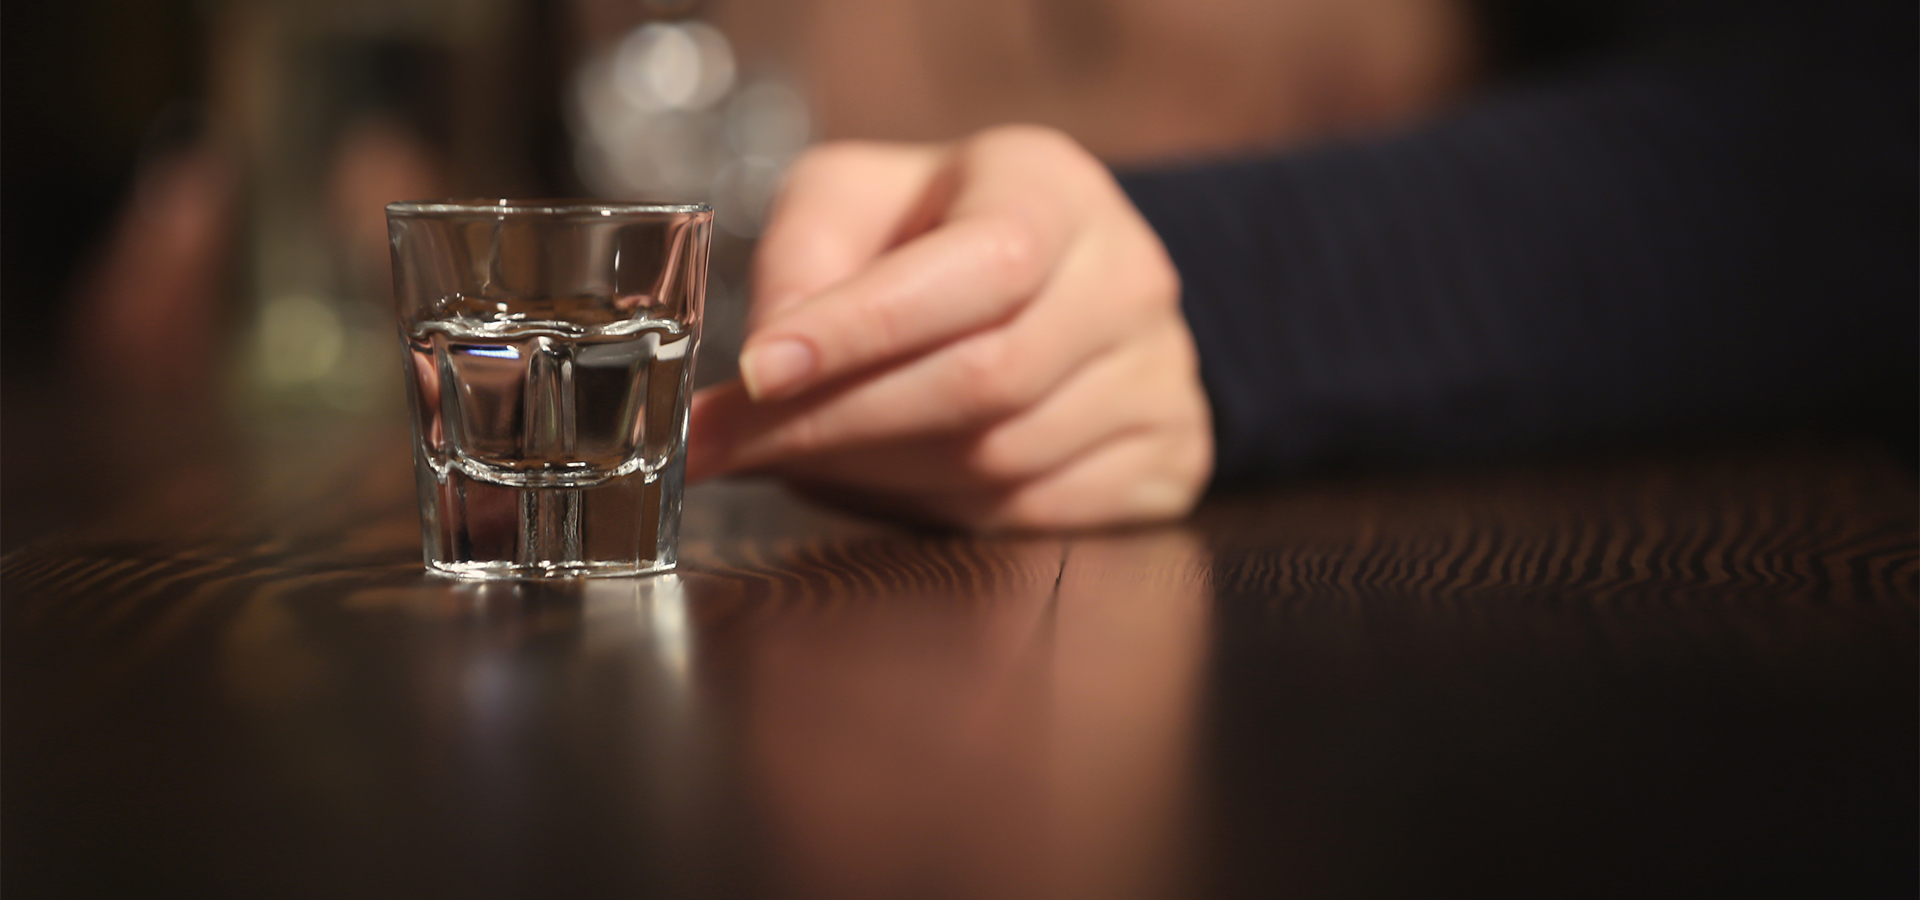 hand reaching out for shot glass